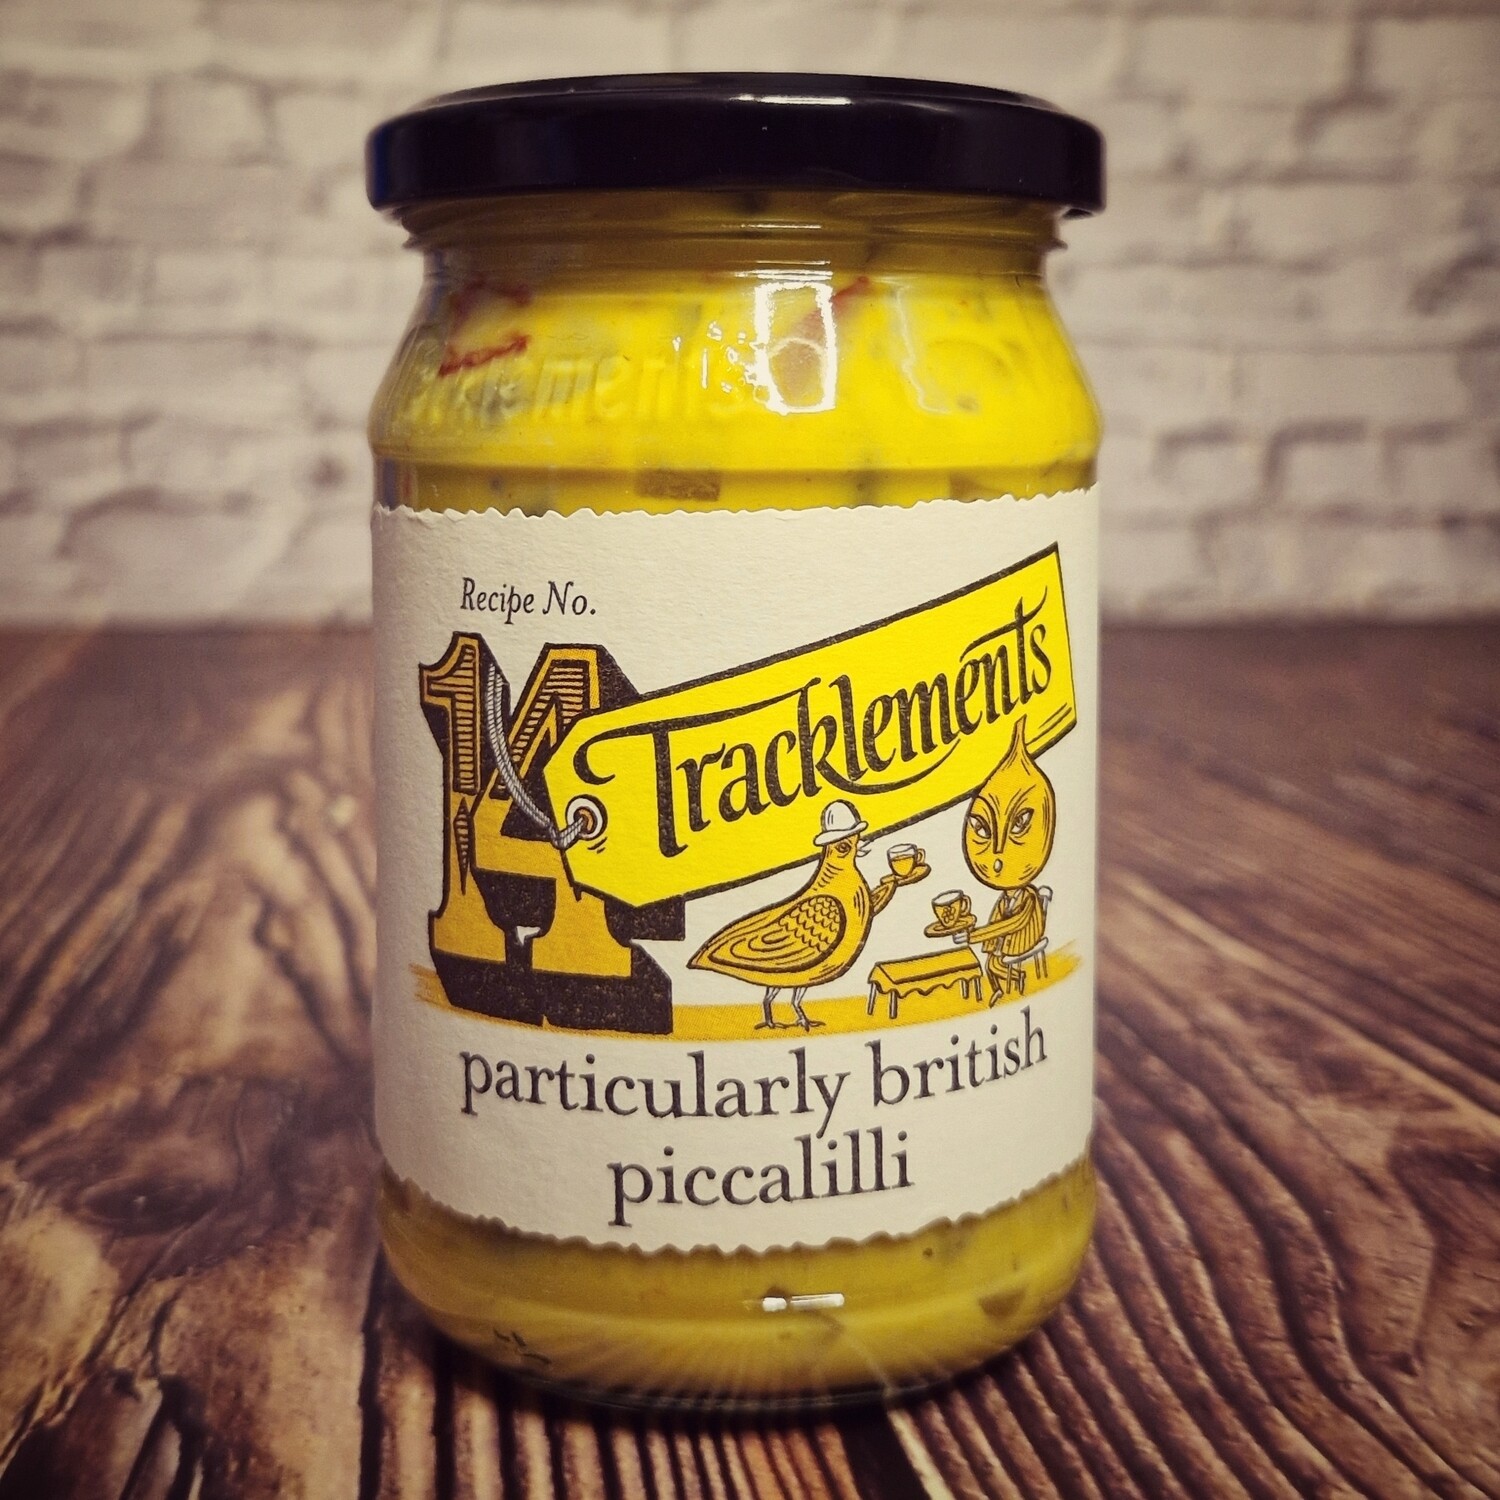 Preorder Tracklements Particularly British Piccalilli